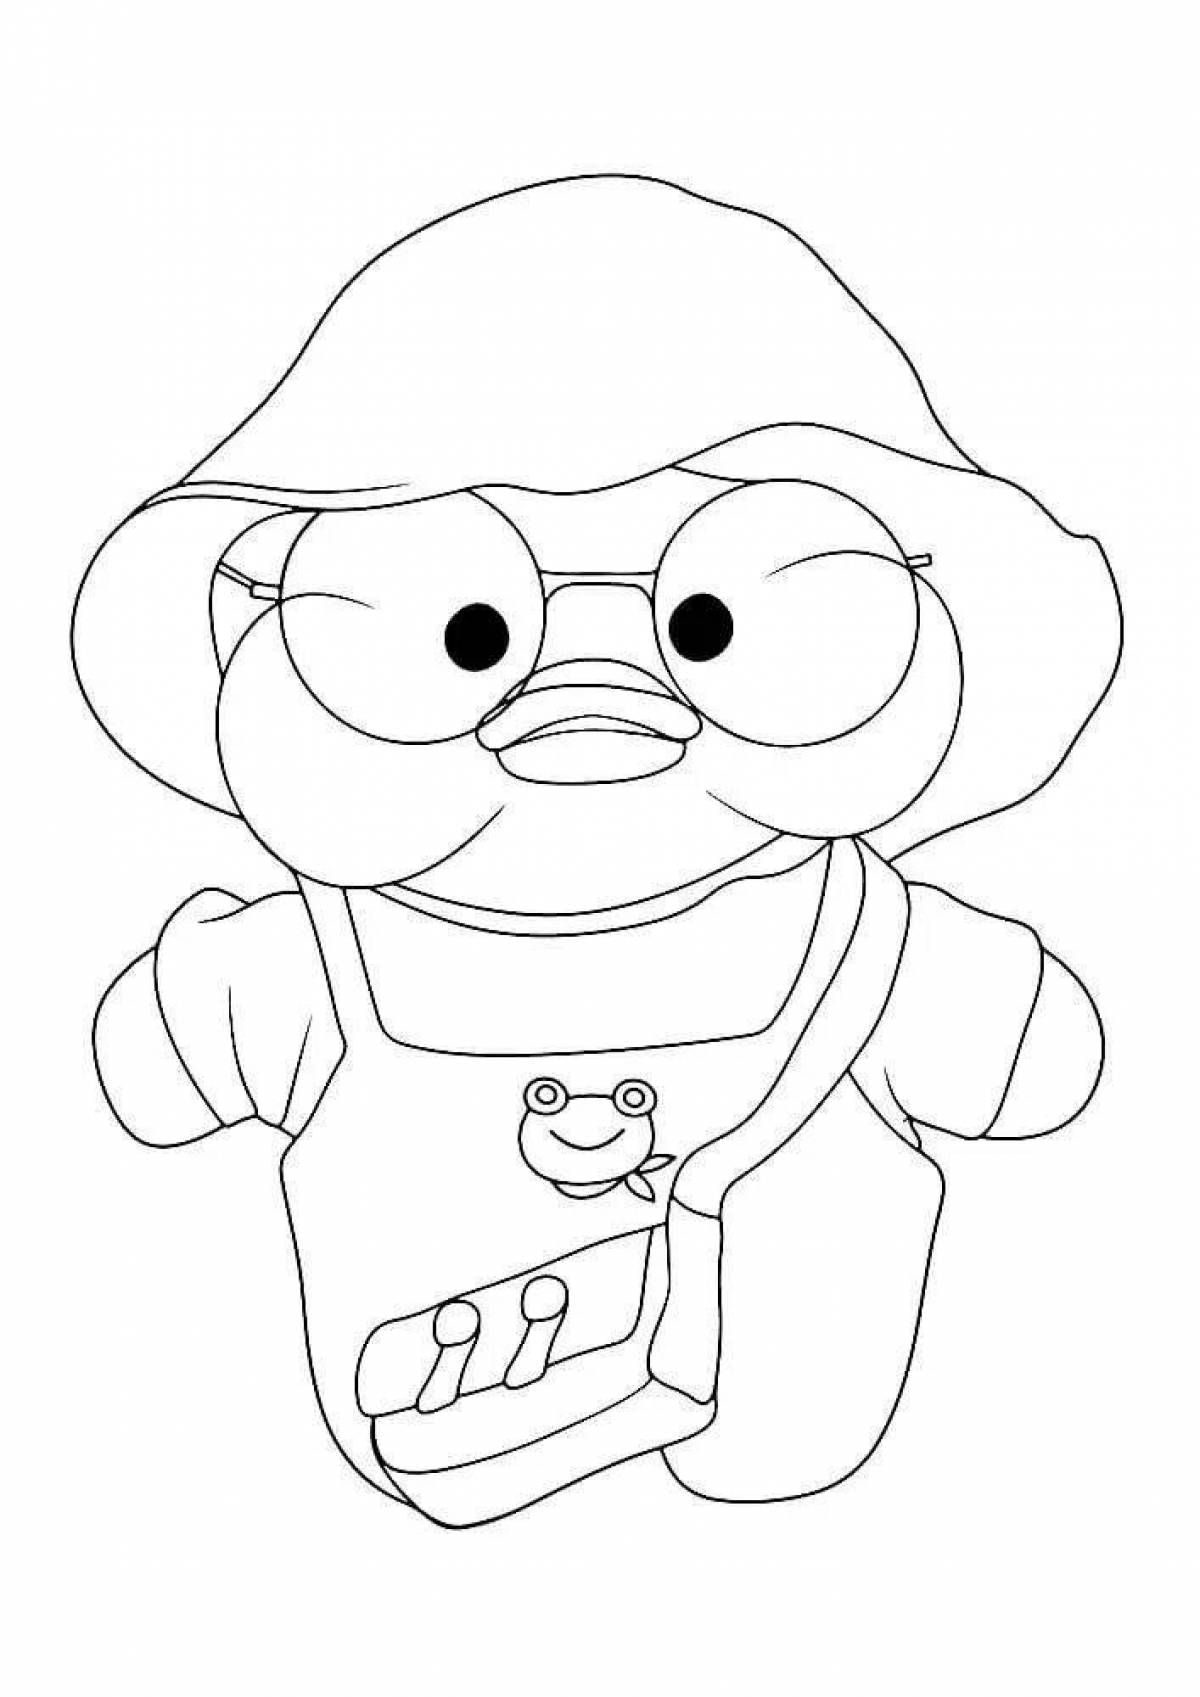 Coloring book dazzling lalafanfan duck